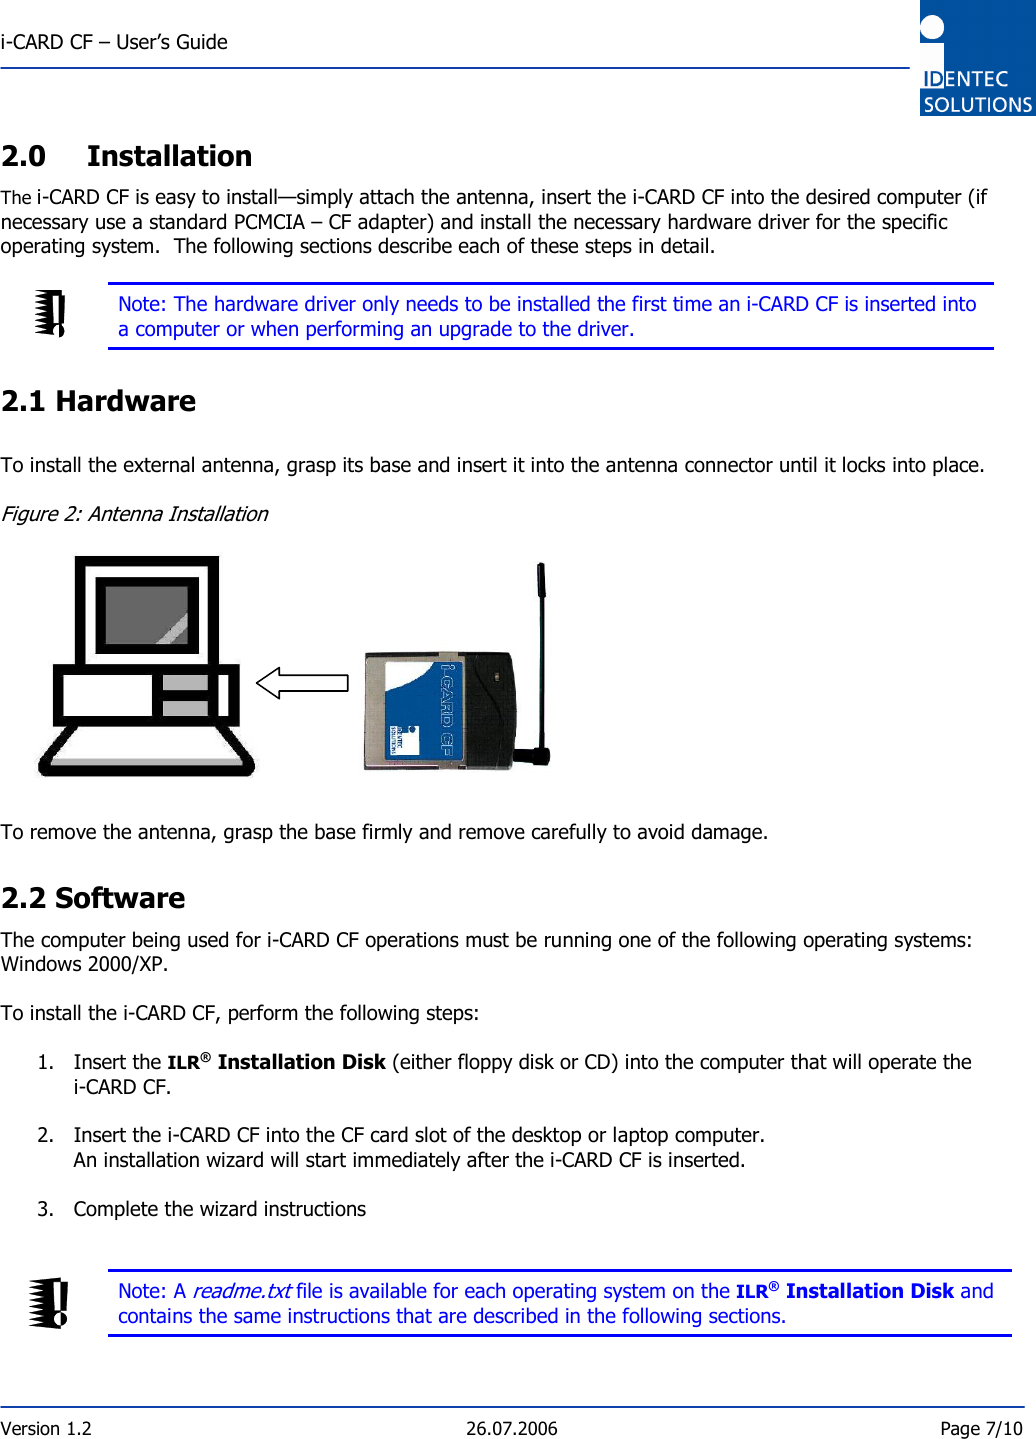  i-CARD CF – User’s Guide  Version 1.2  26.07.2006  Page 7/10     2.0 Installation The i-CARD CF is easy to install—simply attach the antenna, insert the i-CARD CF into the desired computer (if necessary use a standard PCMCIA – CF adapter) and install the necessary hardware driver for the specific operating system.  The following sections describe each of these steps in detail.     Note: The hardware driver only needs to be installed the first time an i-CARD CF is inserted into a computer or when performing an upgrade to the driver.  2.1 Hardware  To install the external antenna, grasp its base and insert it into the antenna connector until it locks into place.  Figure 2: Antenna Installation             To remove the antenna, grasp the base firmly and remove carefully to avoid damage.  2.2 Software The computer being used for i-CARD CF operations must be running one of the following operating systems: Windows 2000/XP.  To install the i-CARD CF, perform the following steps:  1. Insert the ILR® Installation Disk (either floppy disk or CD) into the computer that will operate the  i-CARD CF.  2. Insert the i-CARD CF into the CF card slot of the desktop or laptop computer. An installation wizard will start immediately after the i-CARD CF is inserted.  3. Complete the wizard instructions    Note: A readme.txt file is available for each operating system on the ILR® Installation Disk and contains the same instructions that are described in the following sections.   